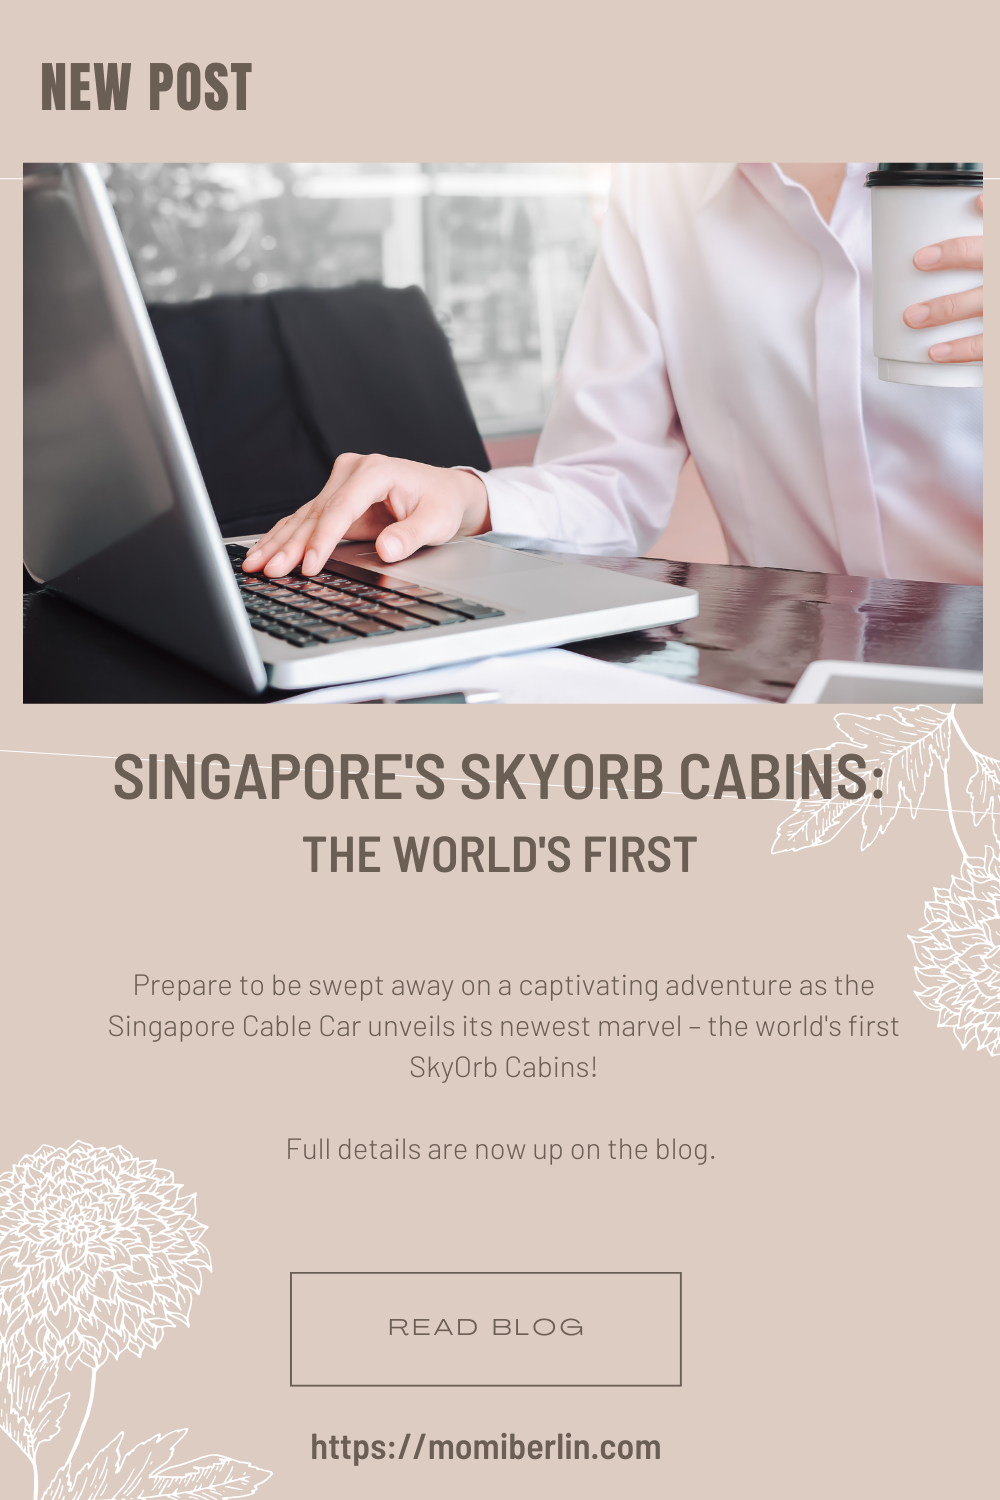 Singapore's SkyOrb Cabins: The World's First